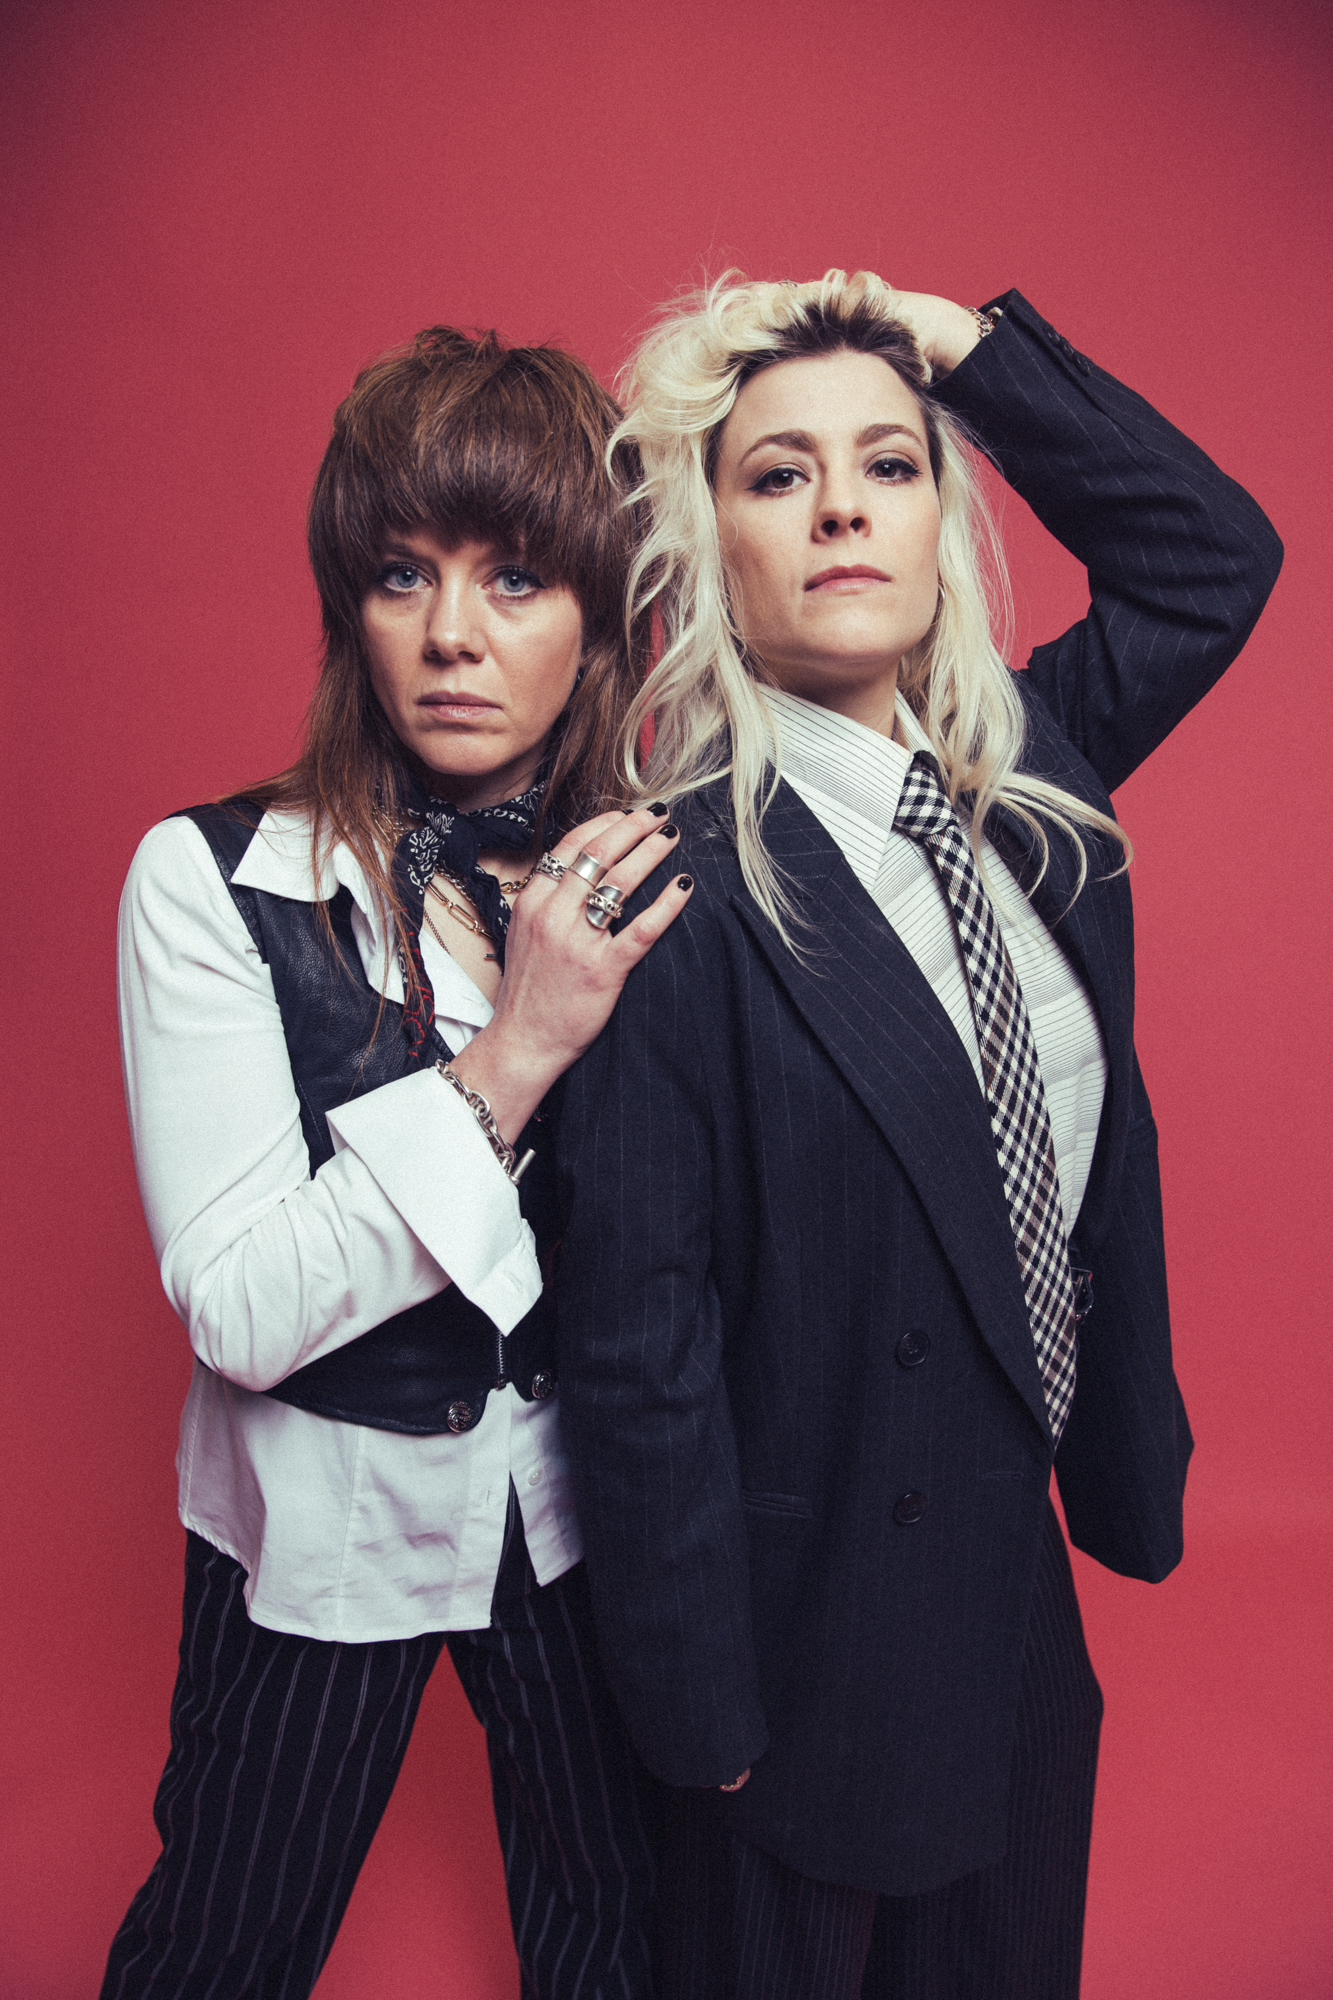 British Hard Rock Duo The Pearl Harts Discuss Their New Album “Love, Chaos,” Their Change in Direction, Having Their Music Featured on “Peaky Blinders,” Opening for Garbage and Skunk Anansie, Touring Ireland for the First Time, and Their New Beginnings